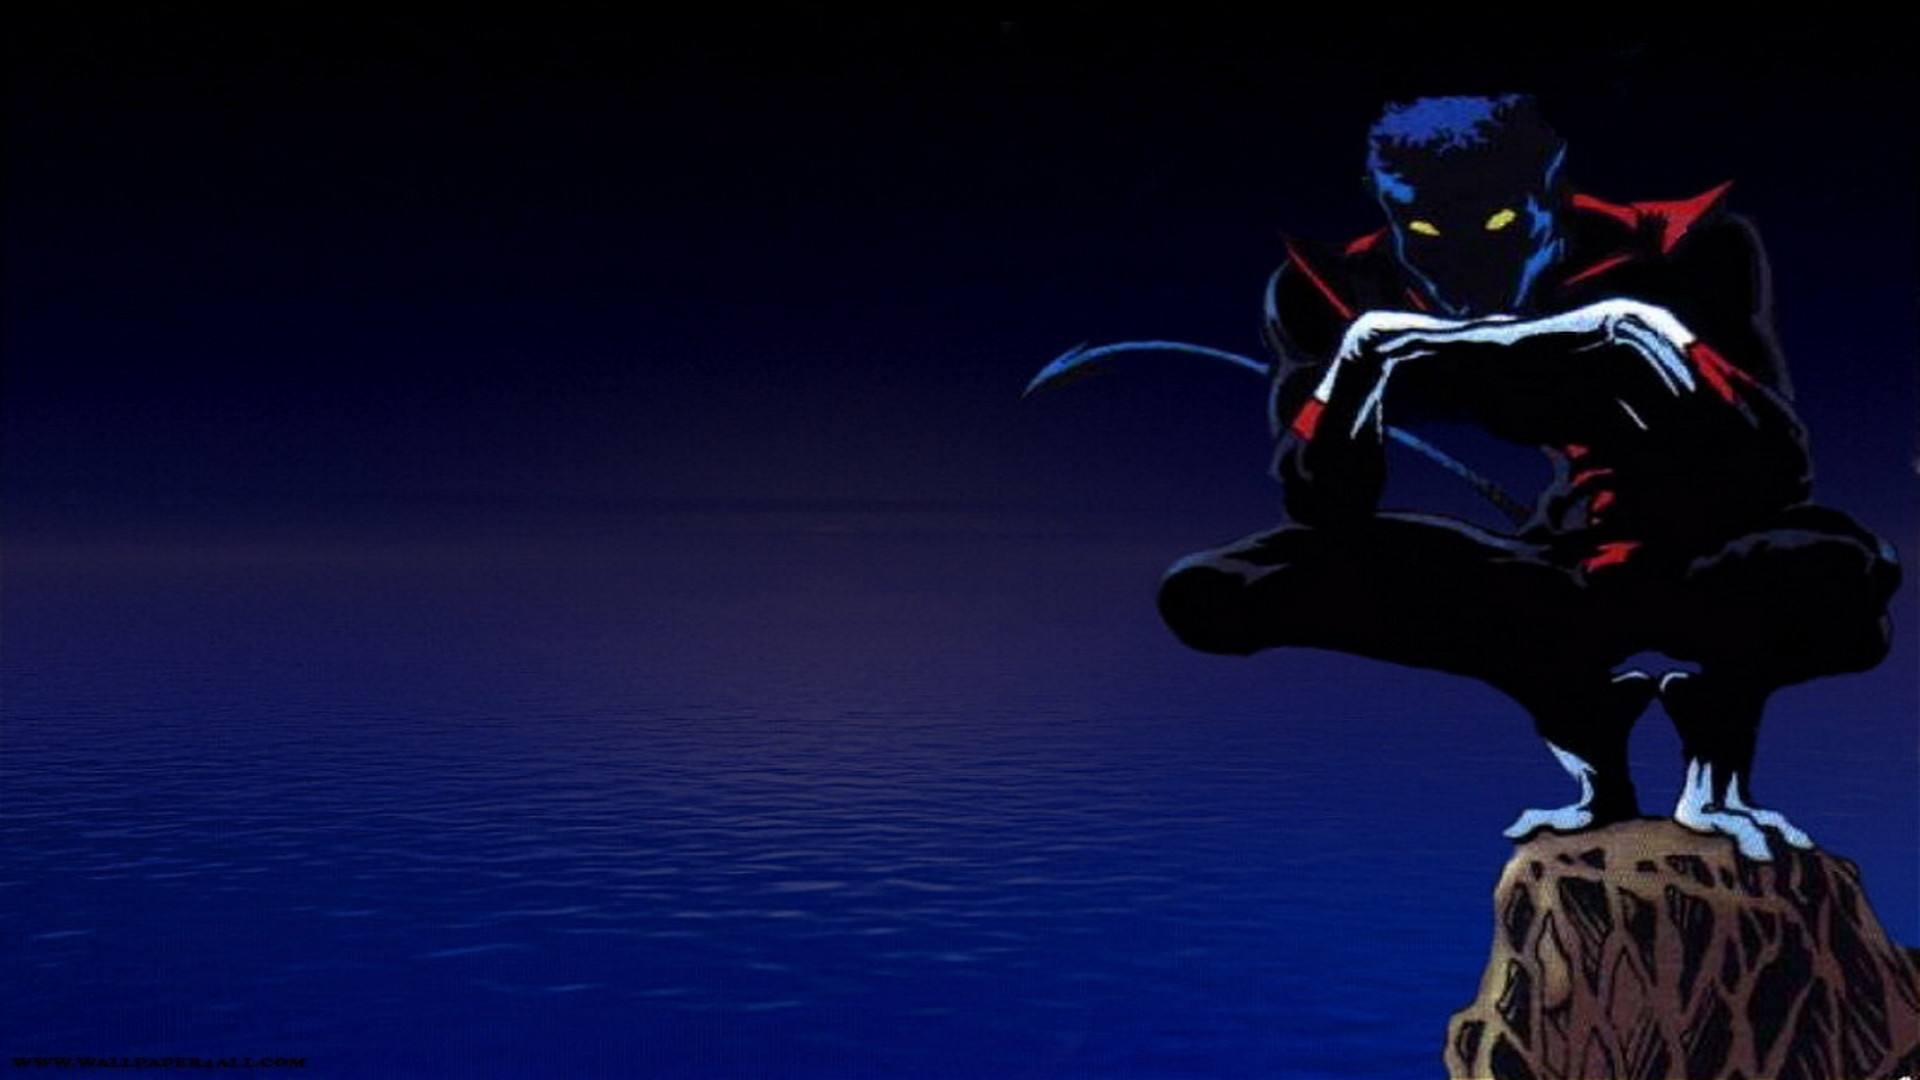 Marvel Comics Wallpapers, Backgrounds, Poster, Wallpaper, - Nightcrawler X Men Background - HD Wallpaper 